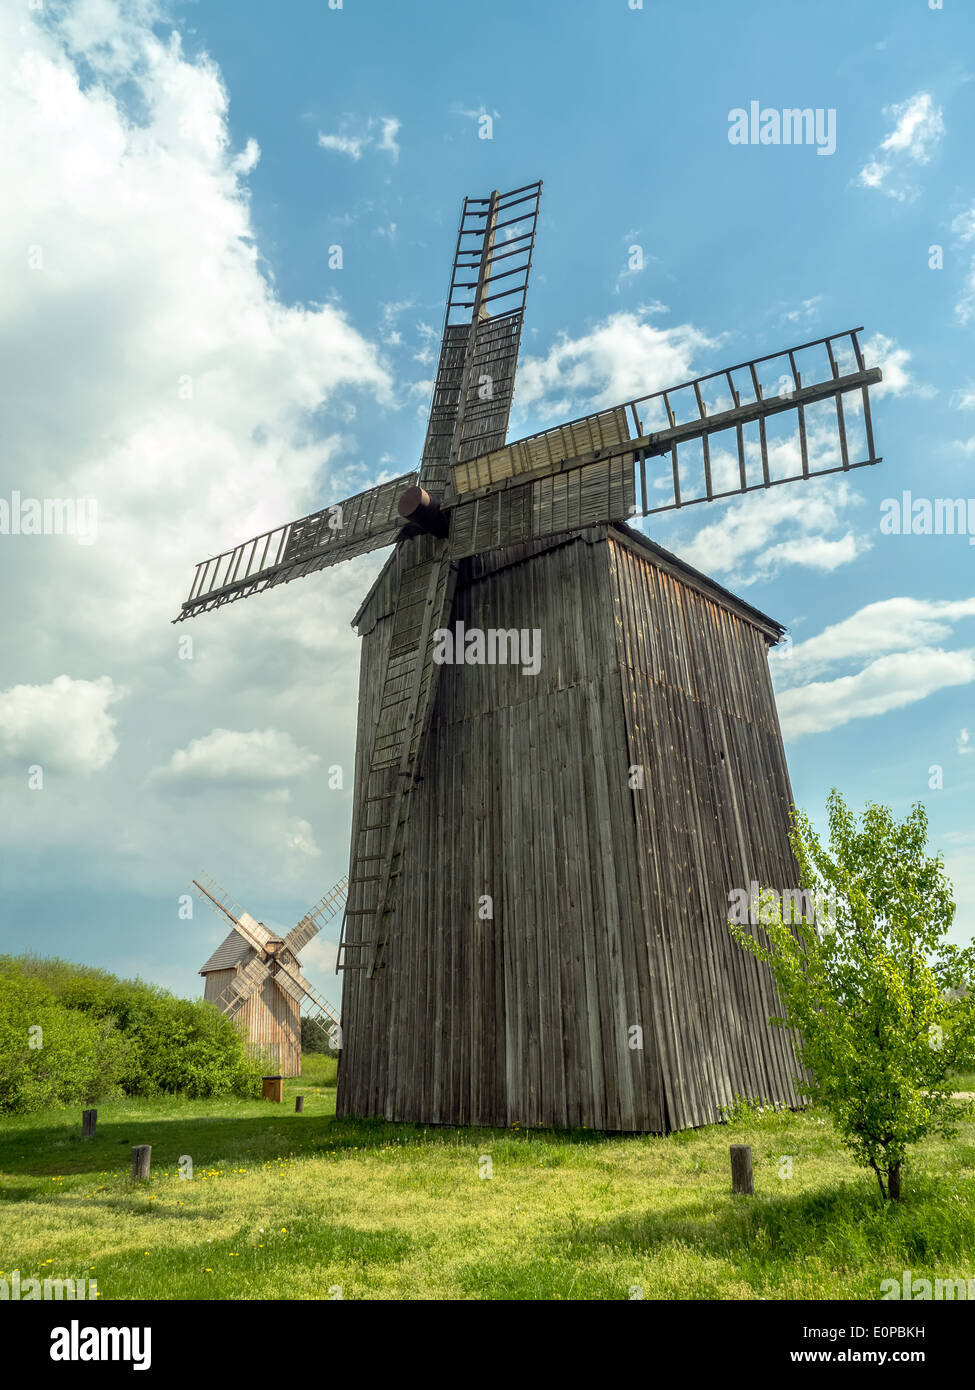 Two old wooden windmills against blue sky Stock Photo